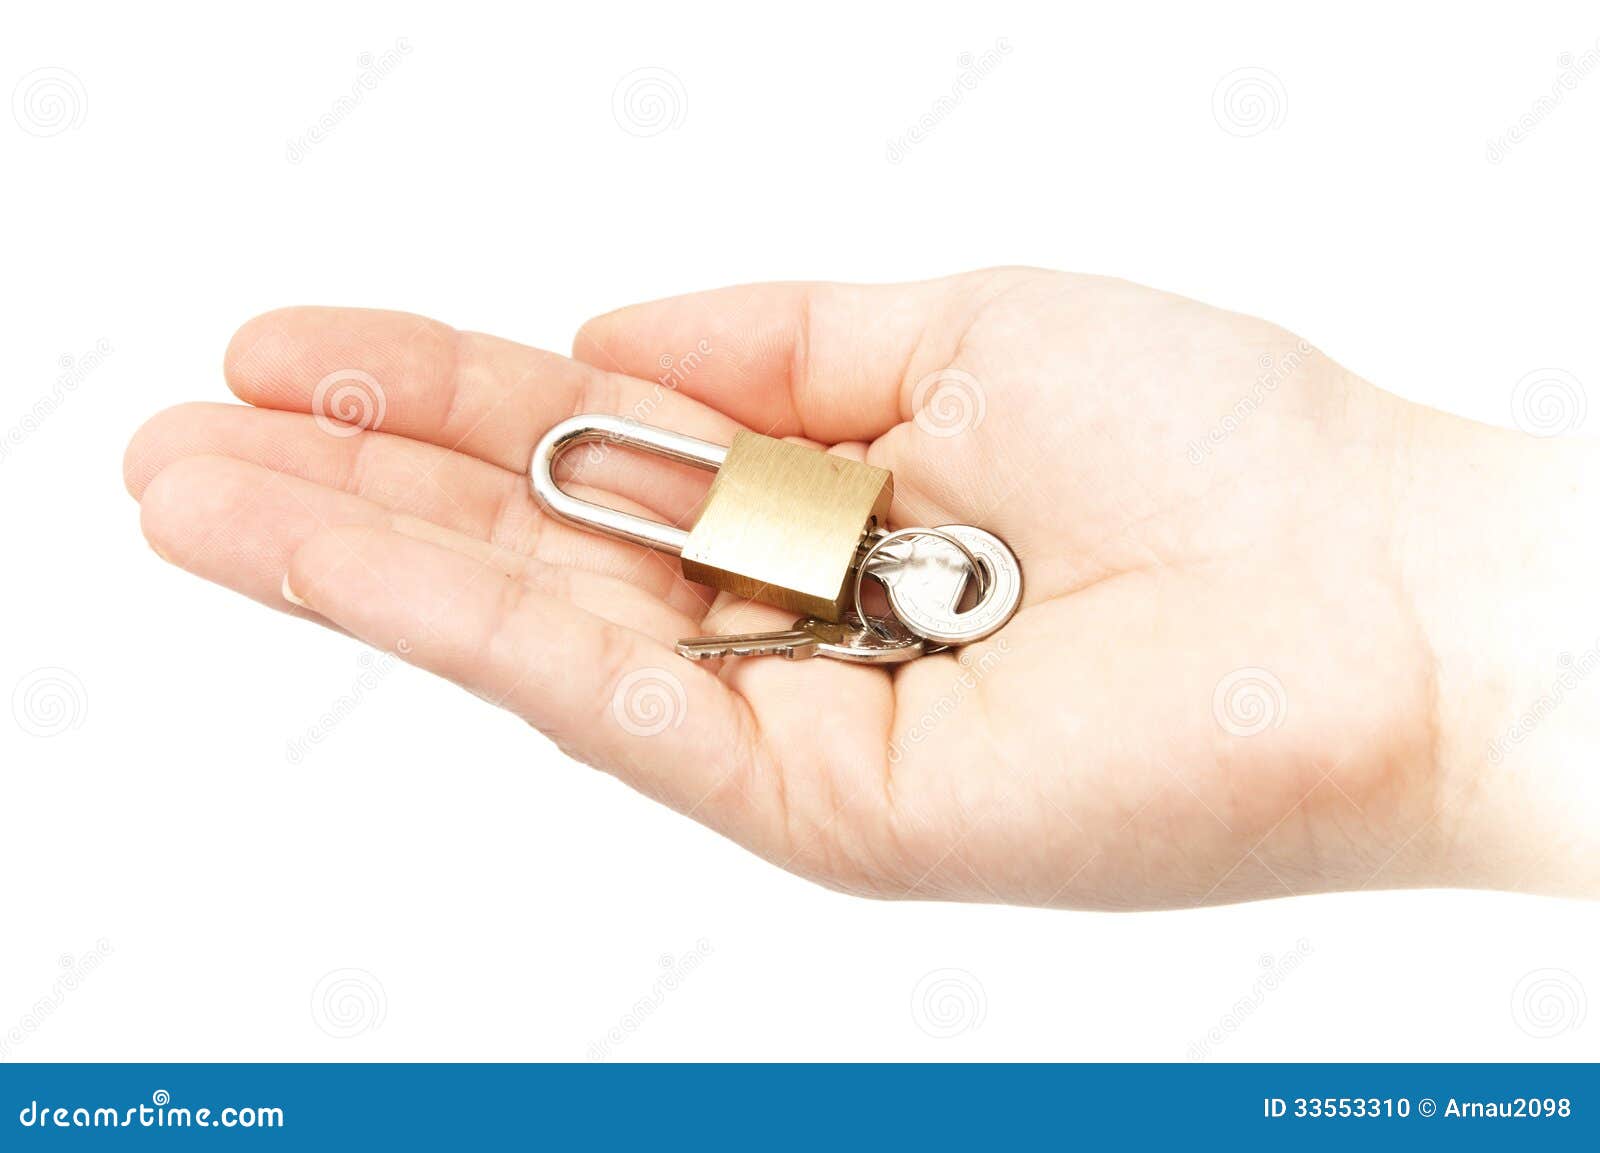 hand with lock and keys